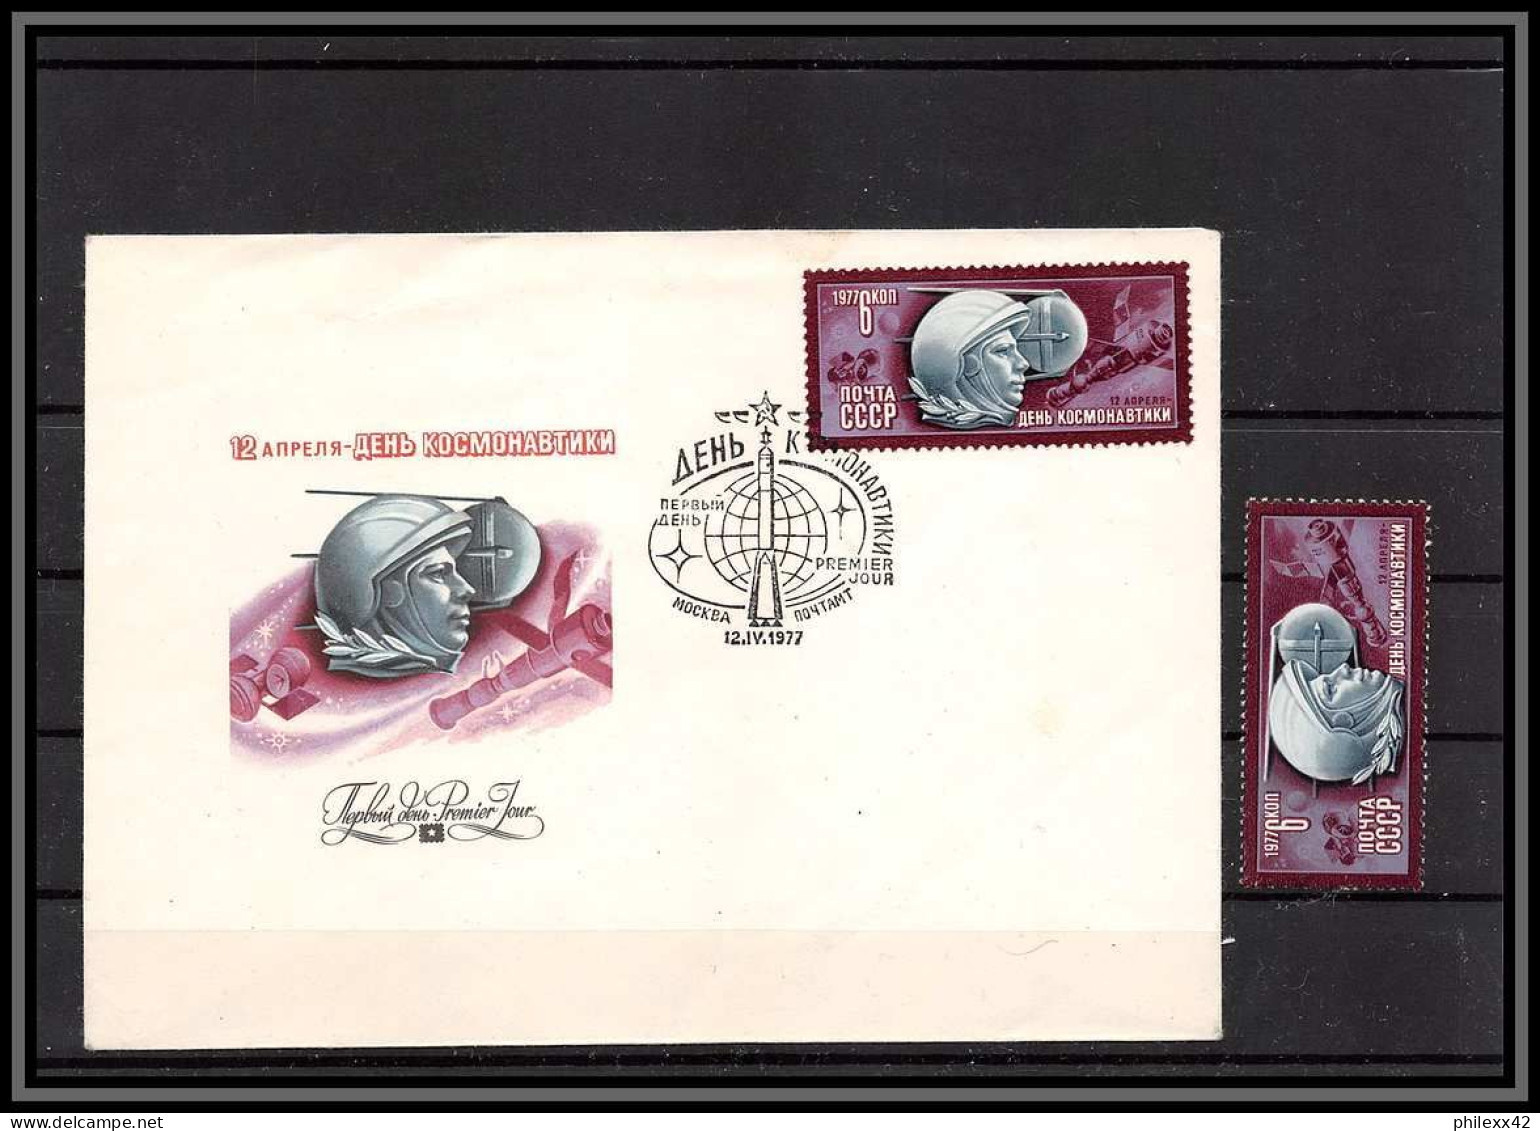 3391 Espace (space) Lettre (cover) Russie (Russia Urss USSR) 4363 Fdc + Mnh ** Cosmonauts Day Gagarine Gagarin 12/4/1977 - Rusia & URSS